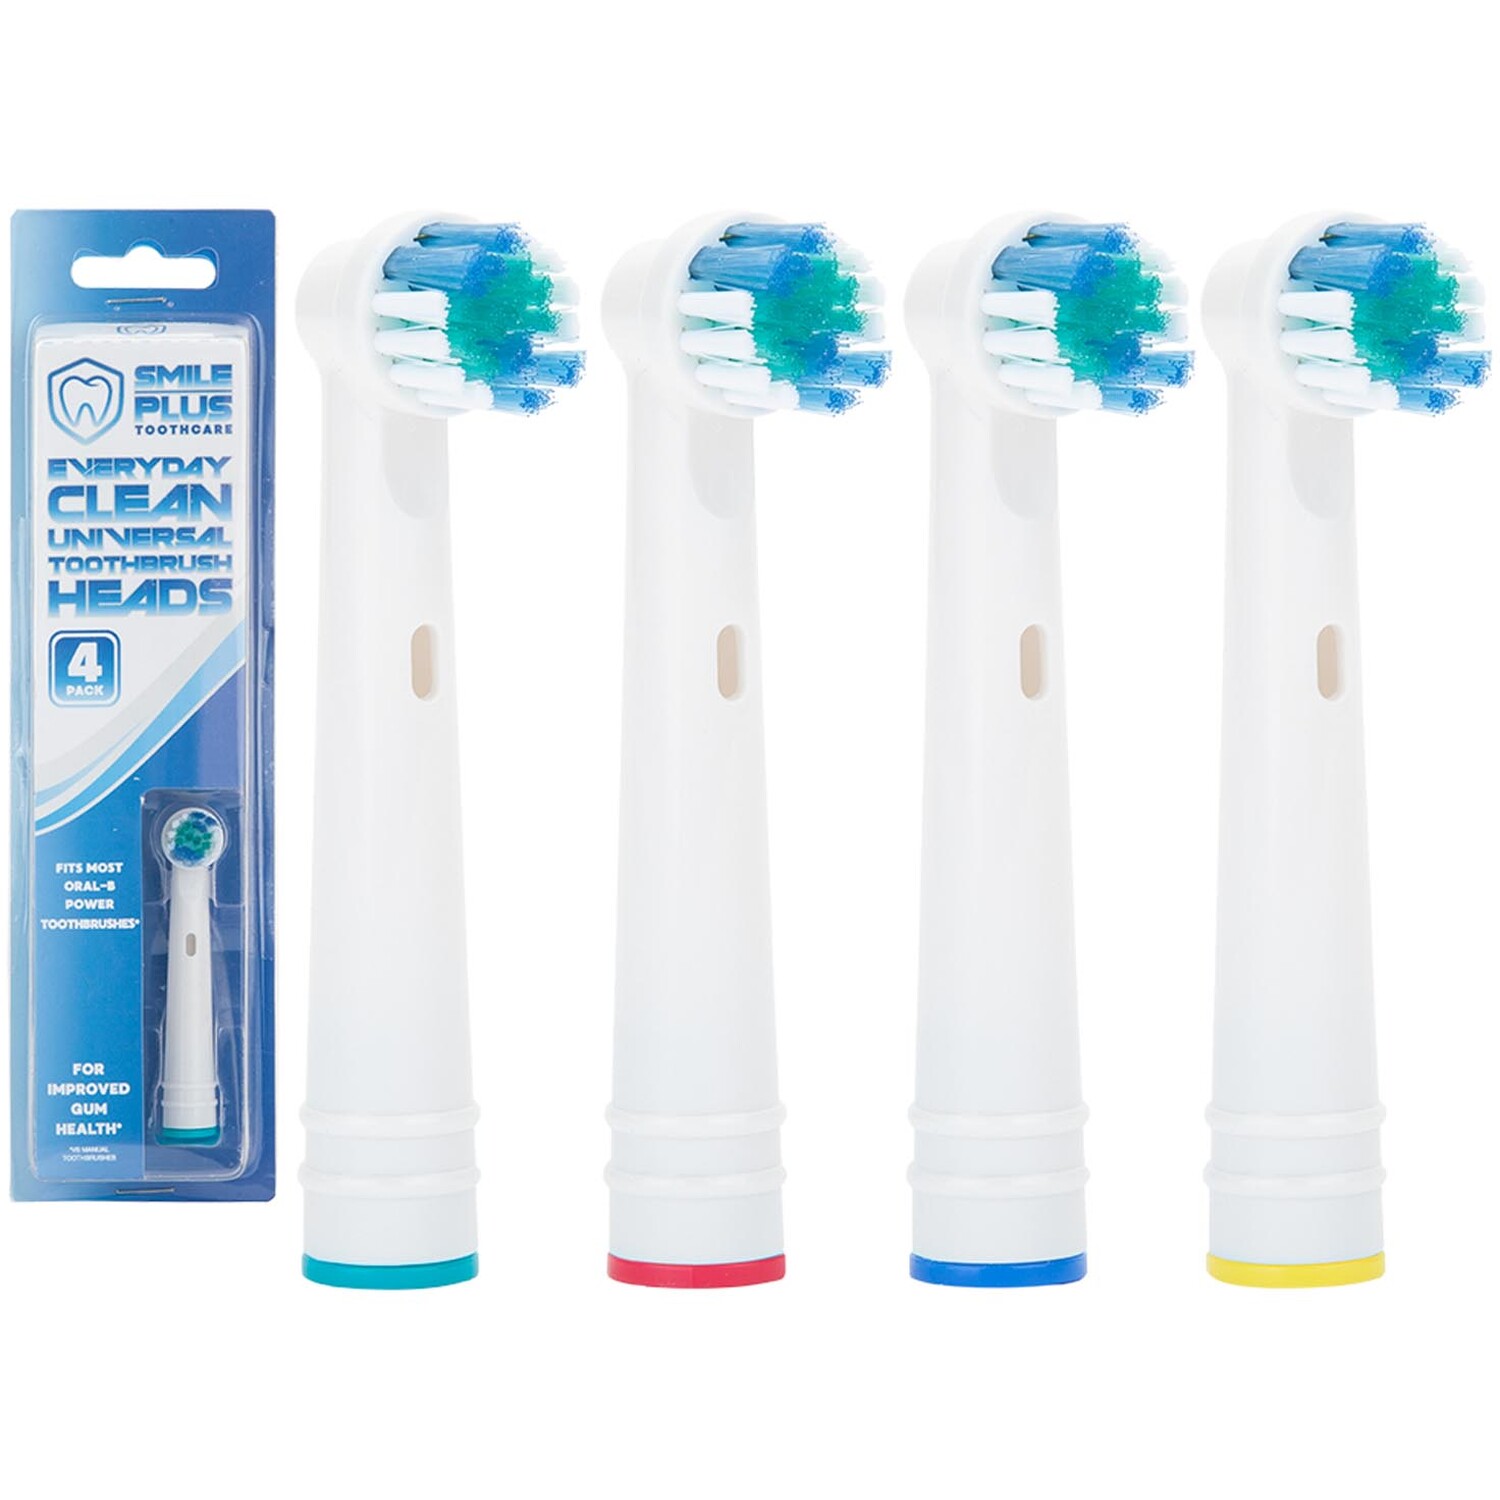 Pack of 4 Smile Plus Universal Toothbrush Heads - White Image